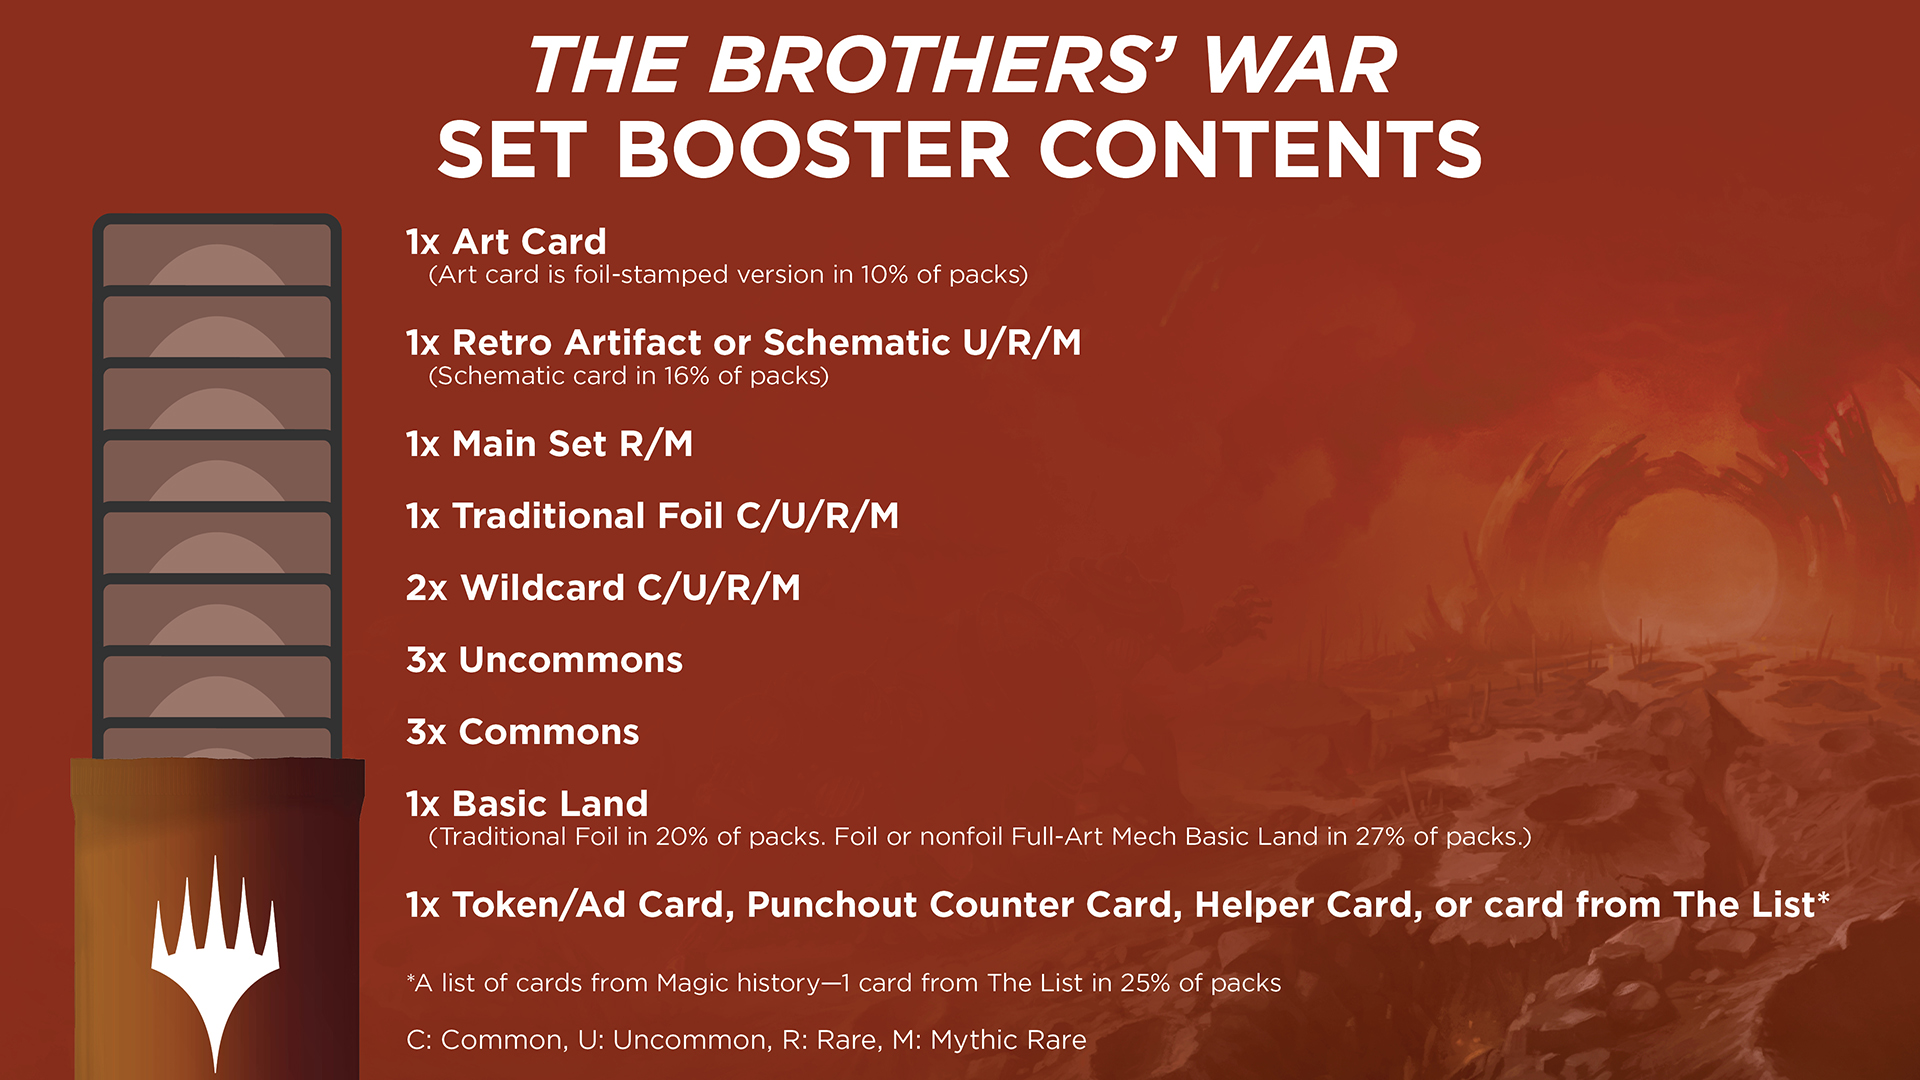 The Brothers' War Set Booster Collation Infographic